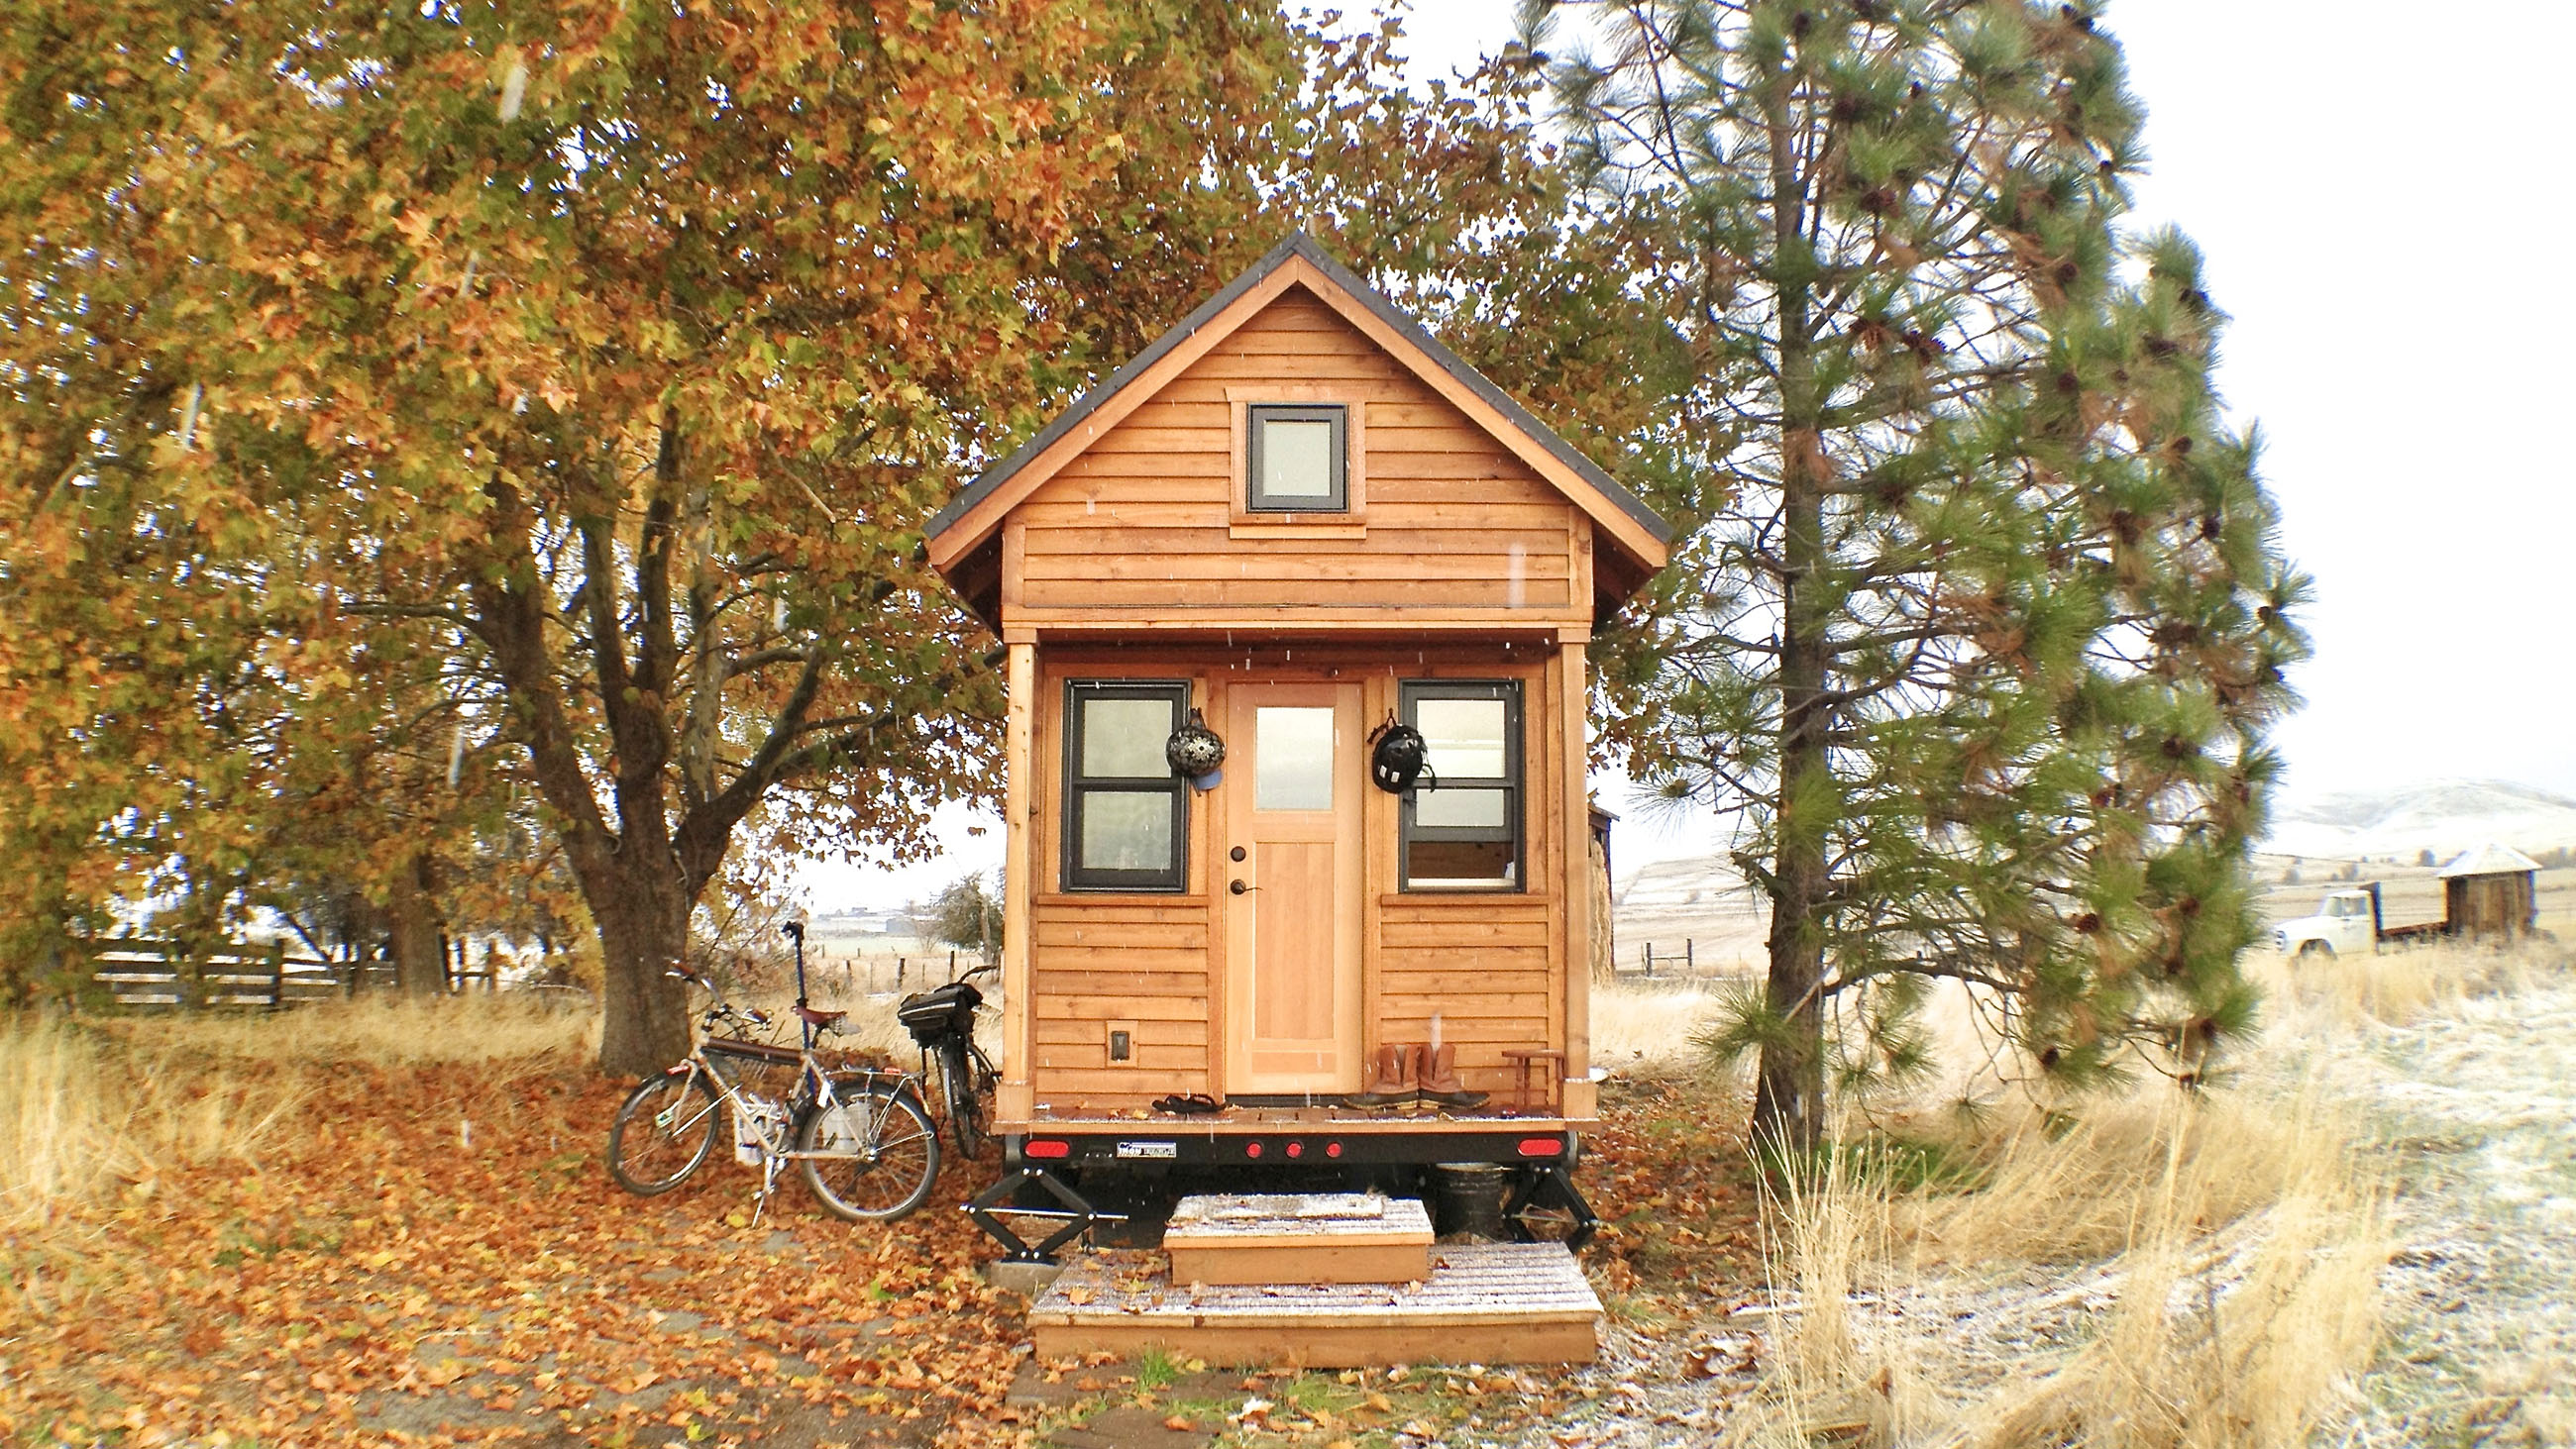 The Psychology of Living in Small Spaces